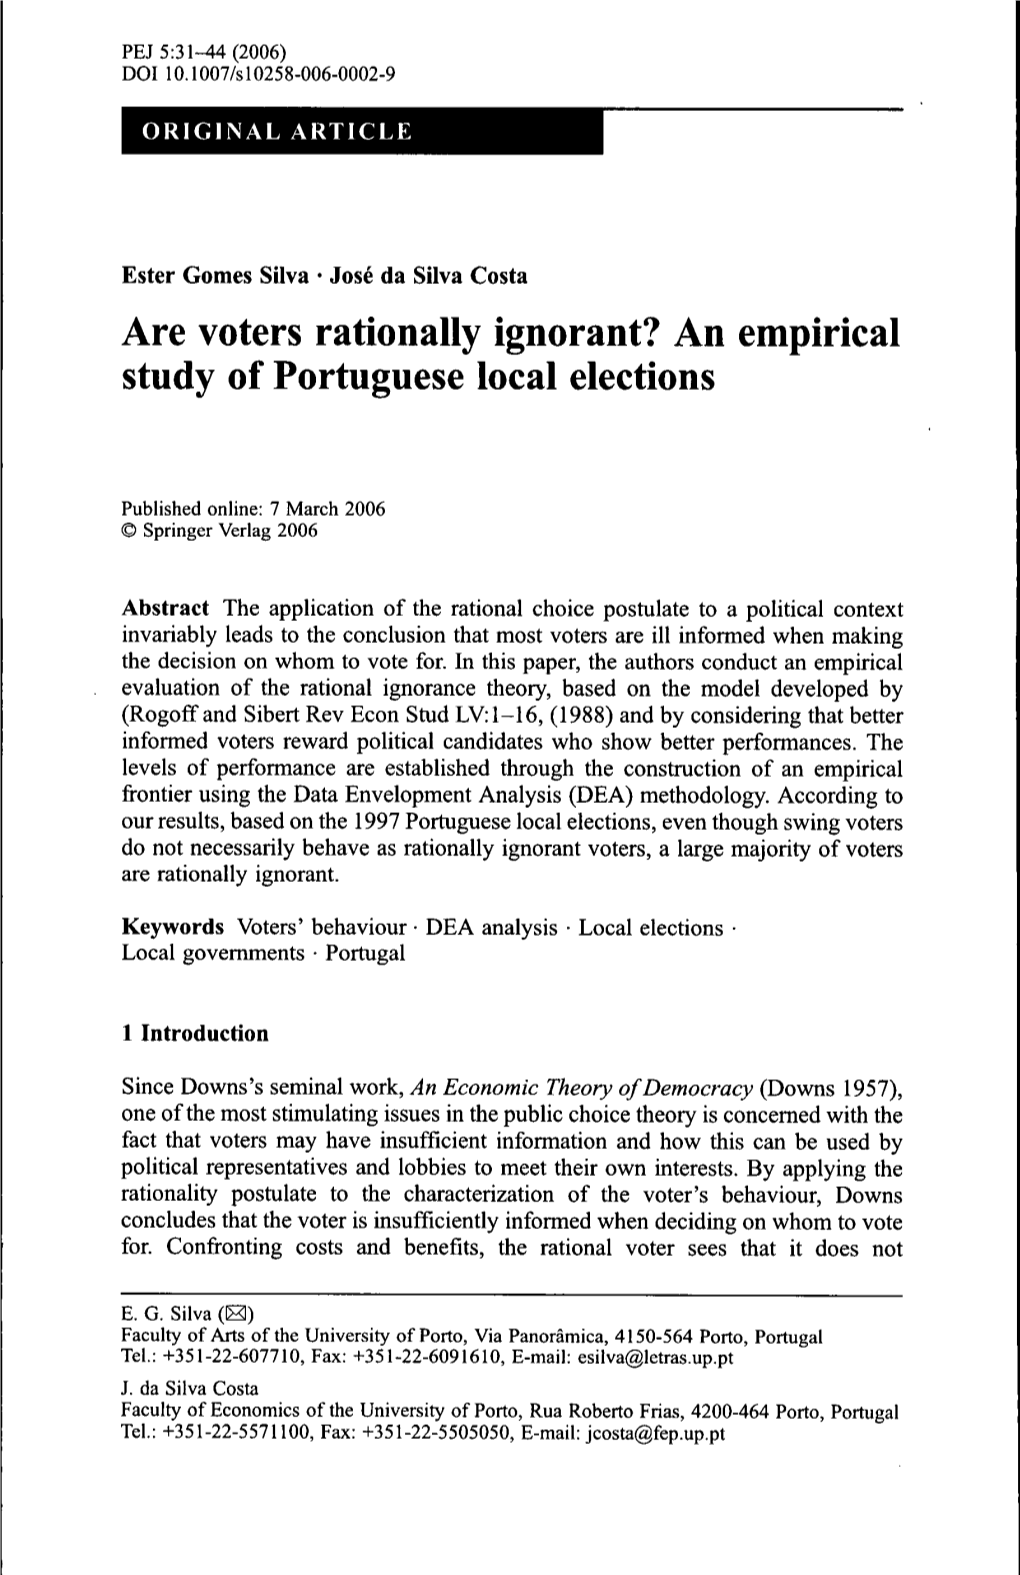 Are Voters Rationally Ignorant? an Empirical Study of Portuguese Local Elections